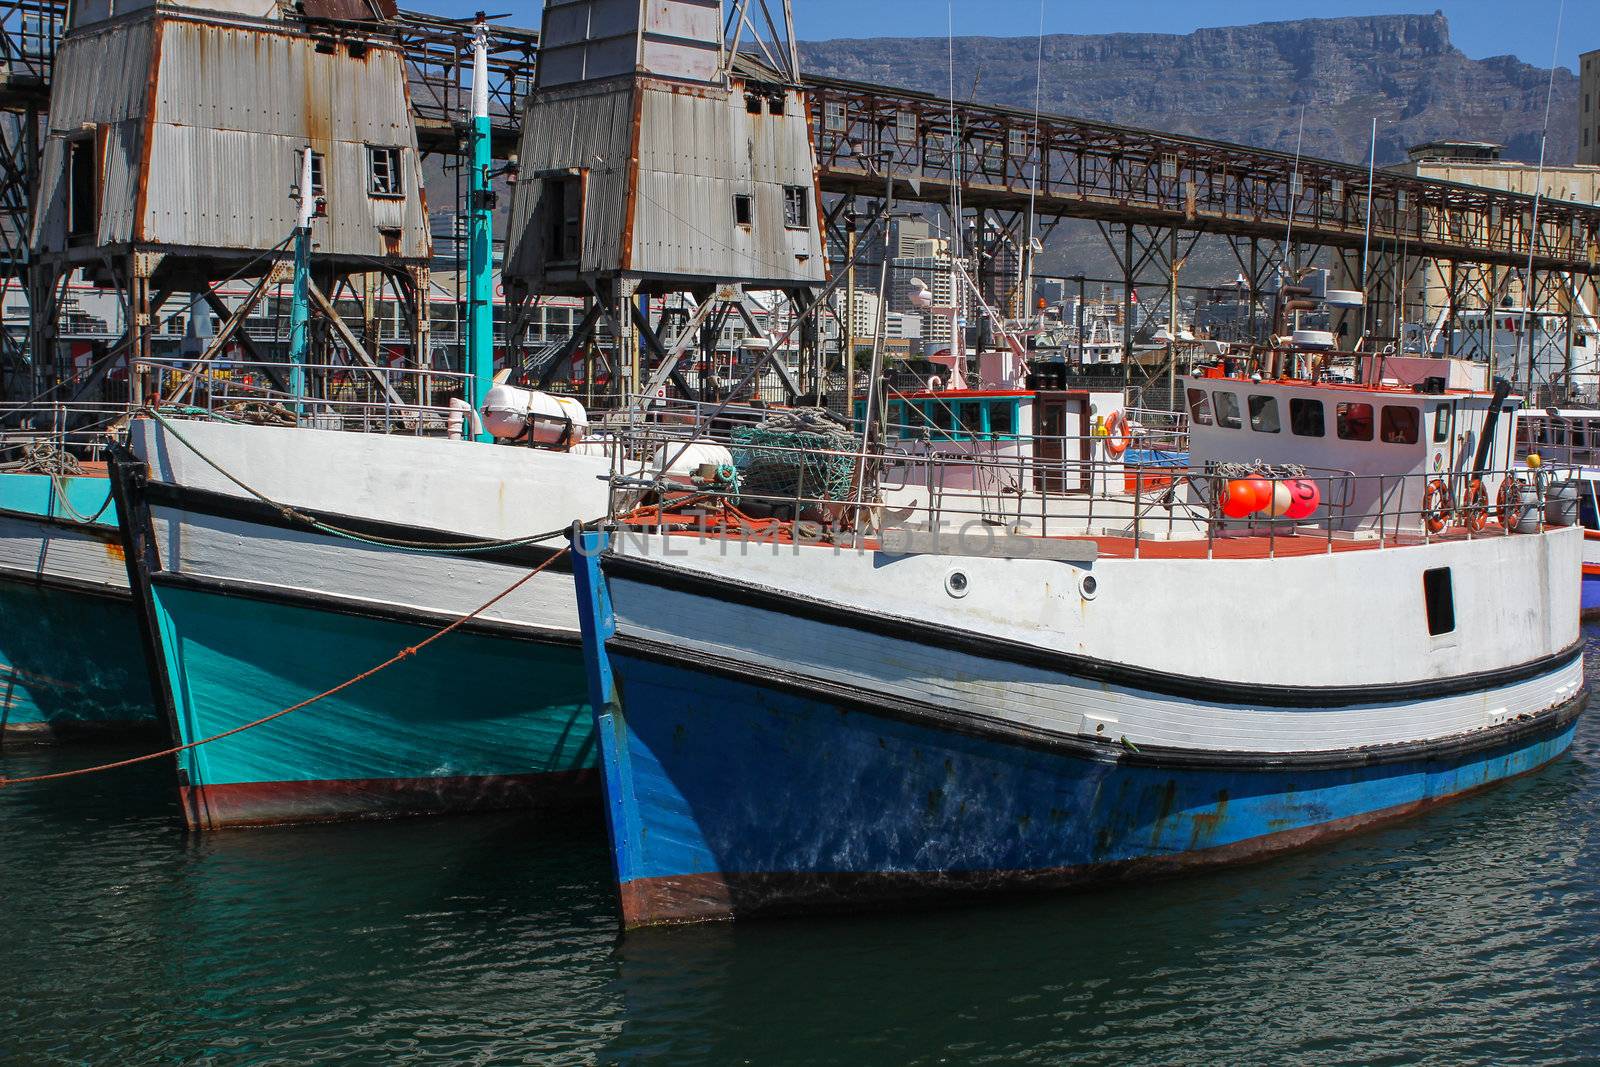 Boats at Cape Town Harbor by dwaschnig_photo